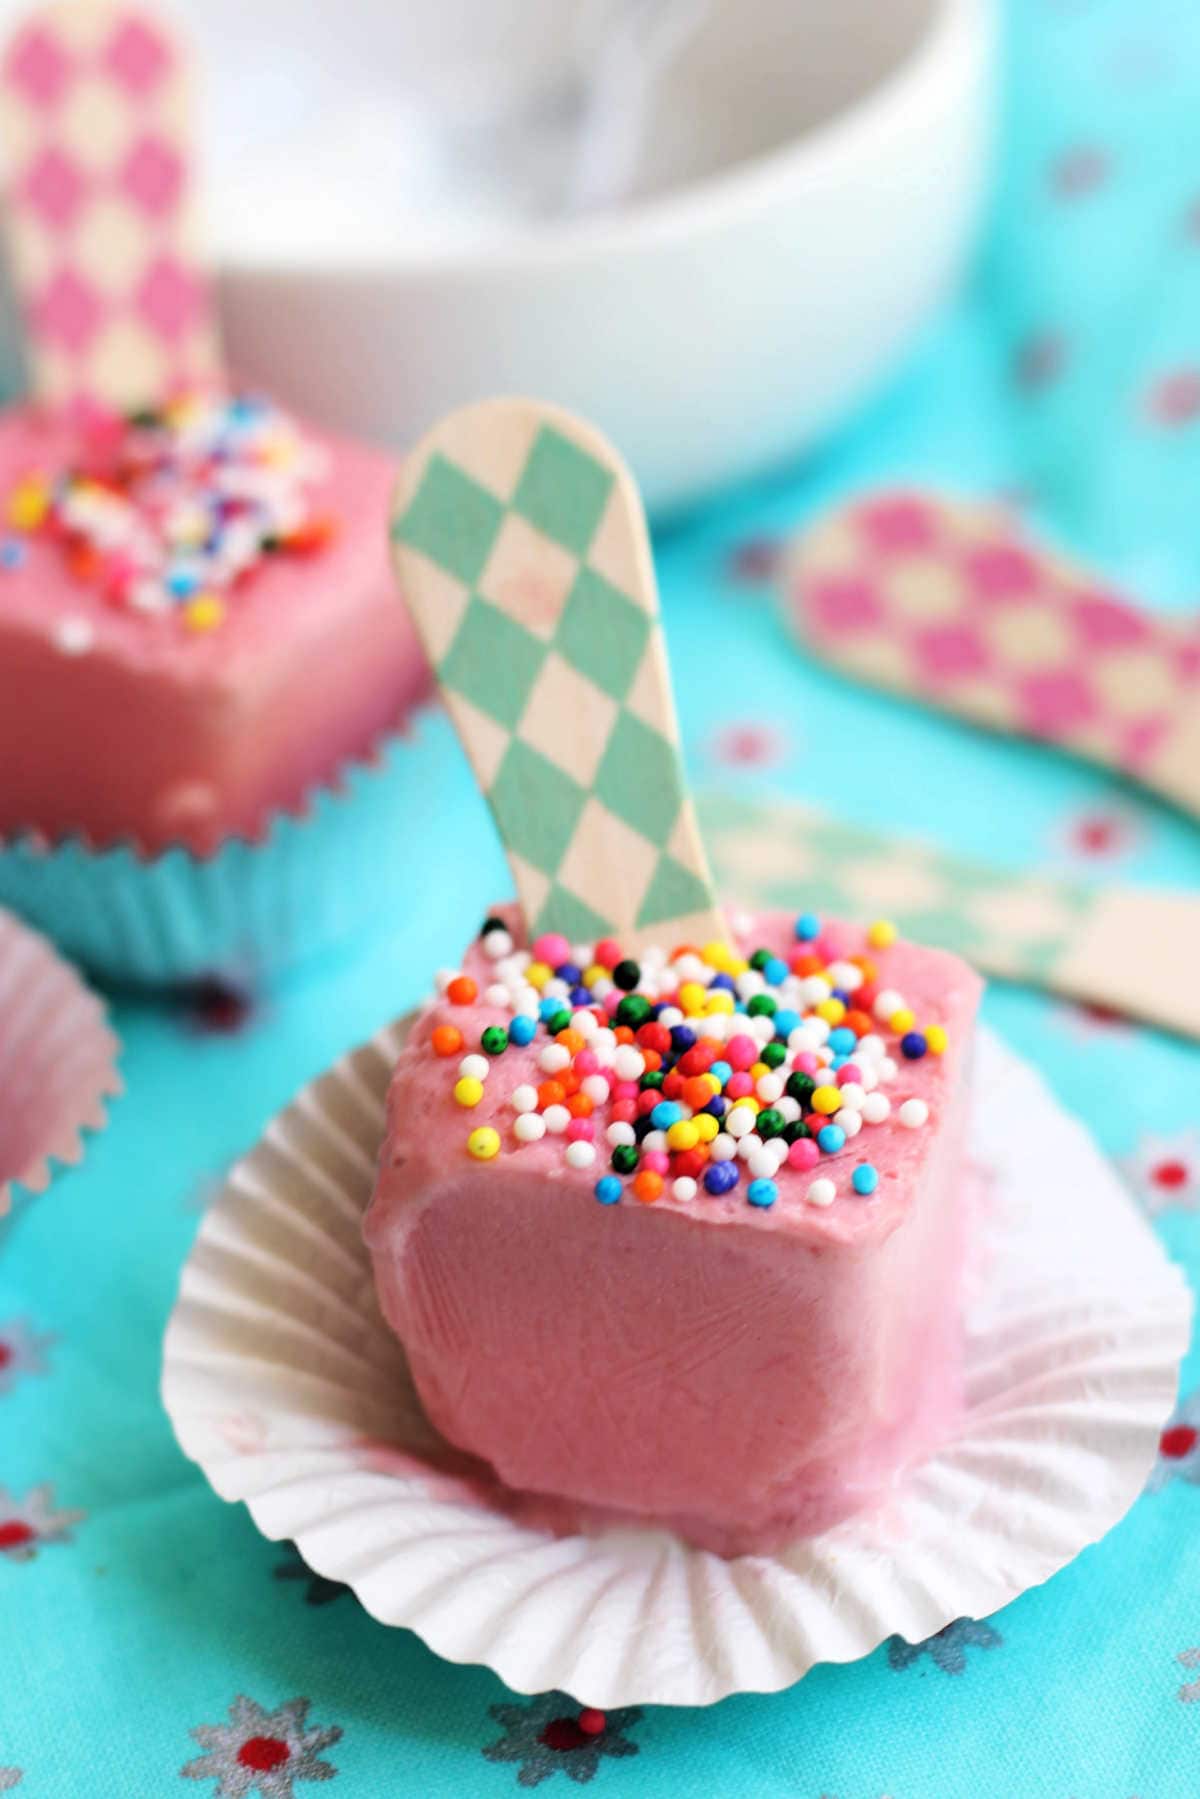 Close-up of Creamy Strawberry Popsicles in a Muffin Cup Liner on a Table